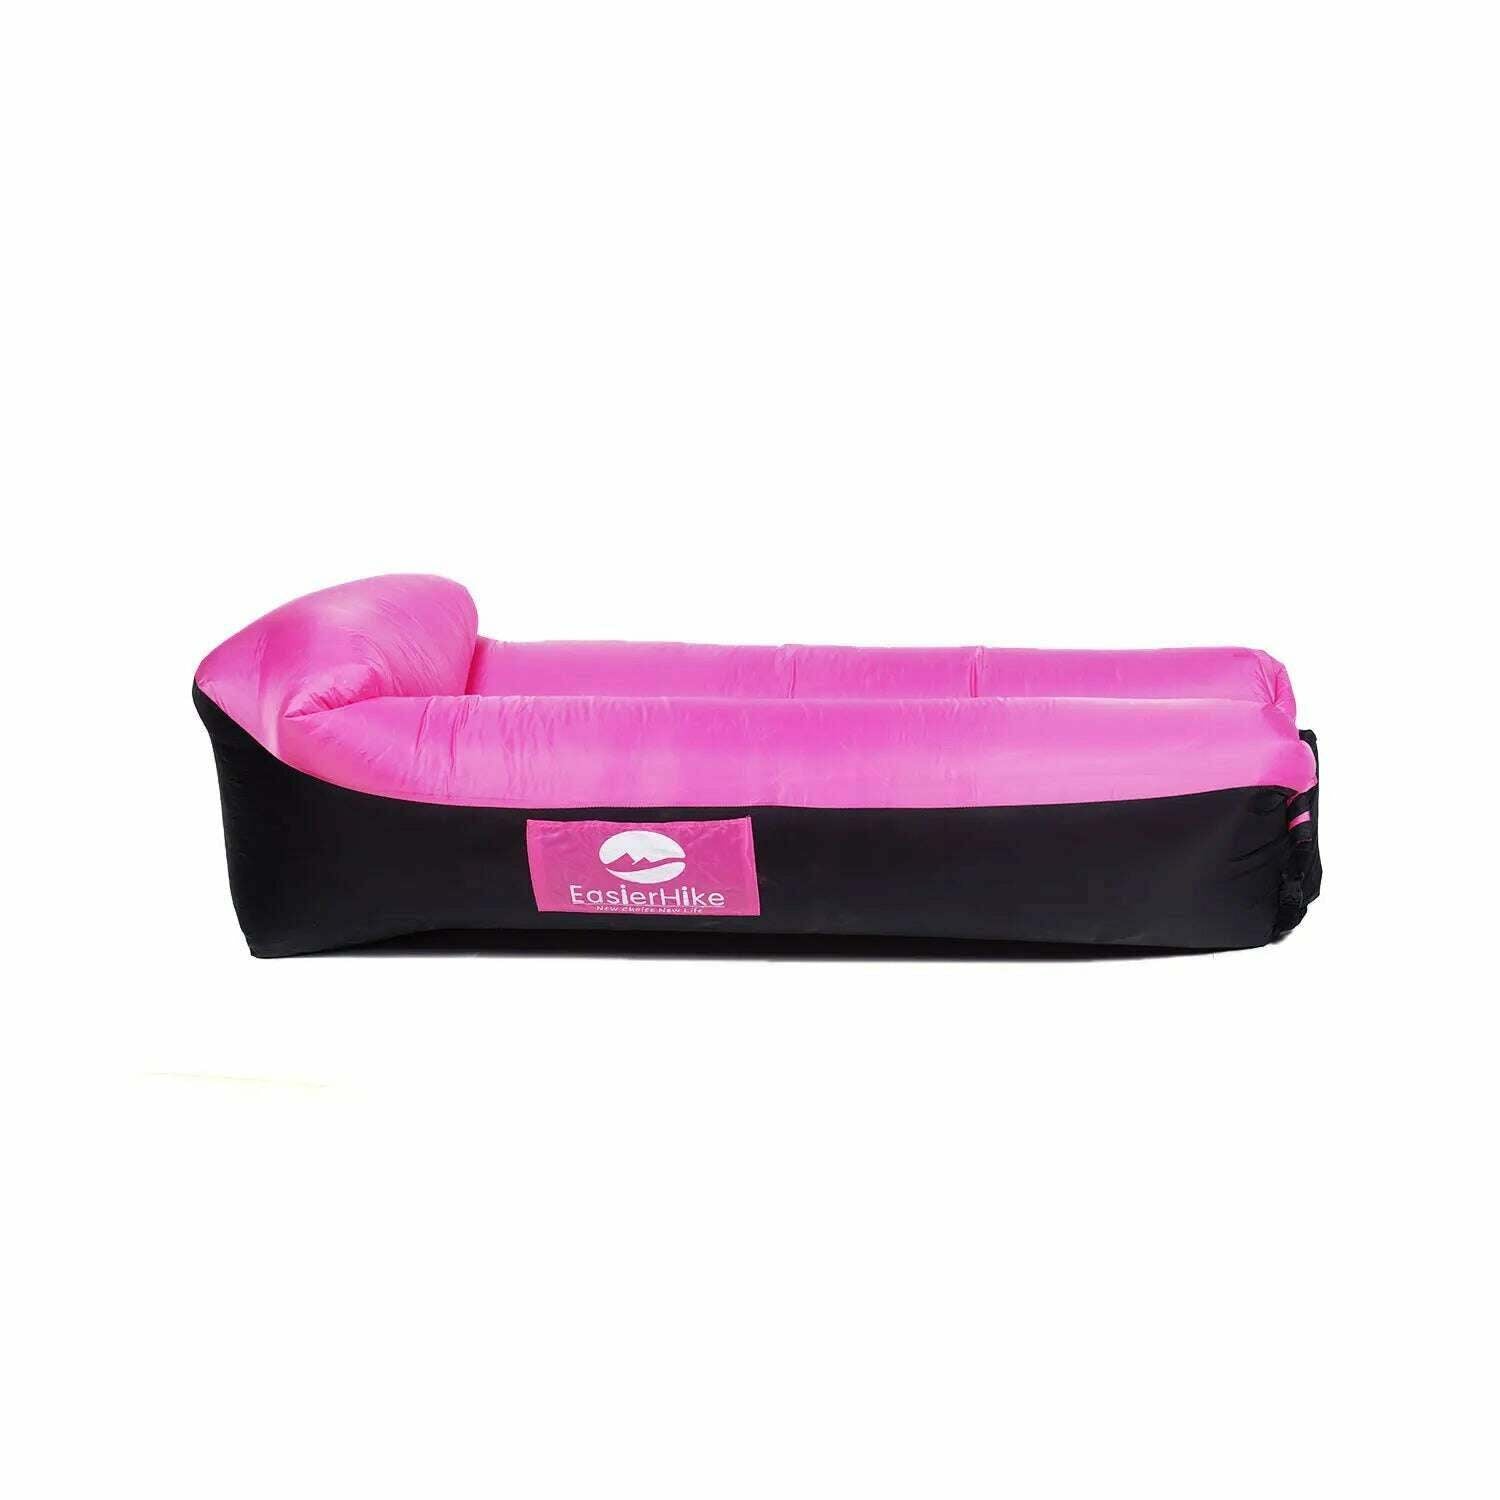 KIMLUD, Beach Lawn Casual Lazy Inflatable Sofa Portable Inflatable Bed Trekking In The Woods Off-road Air Bed Outdoor and Indoor, Pink black, KIMLUD Womens Clothes